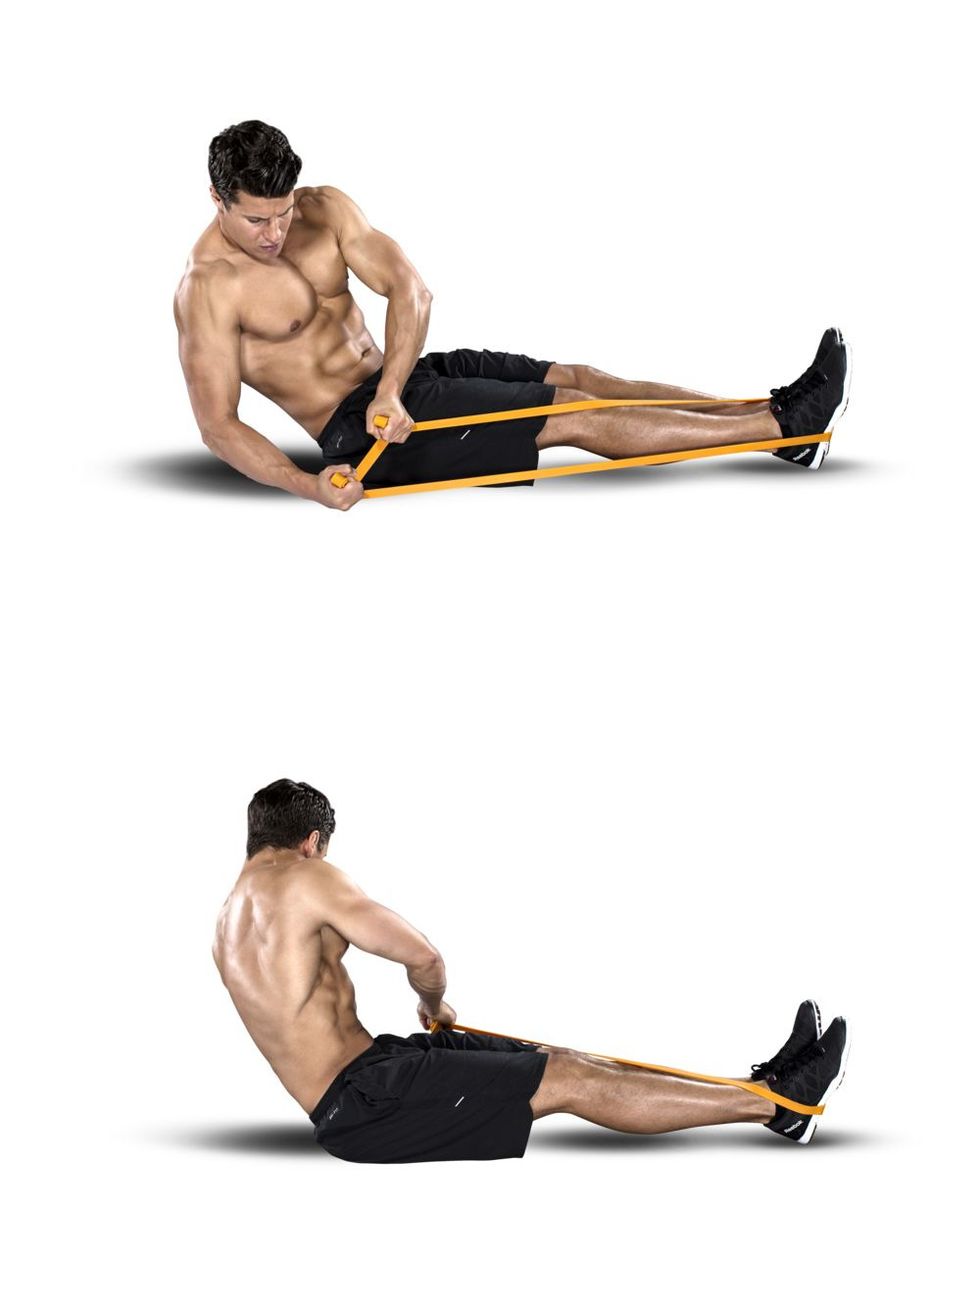 resistance band workouts